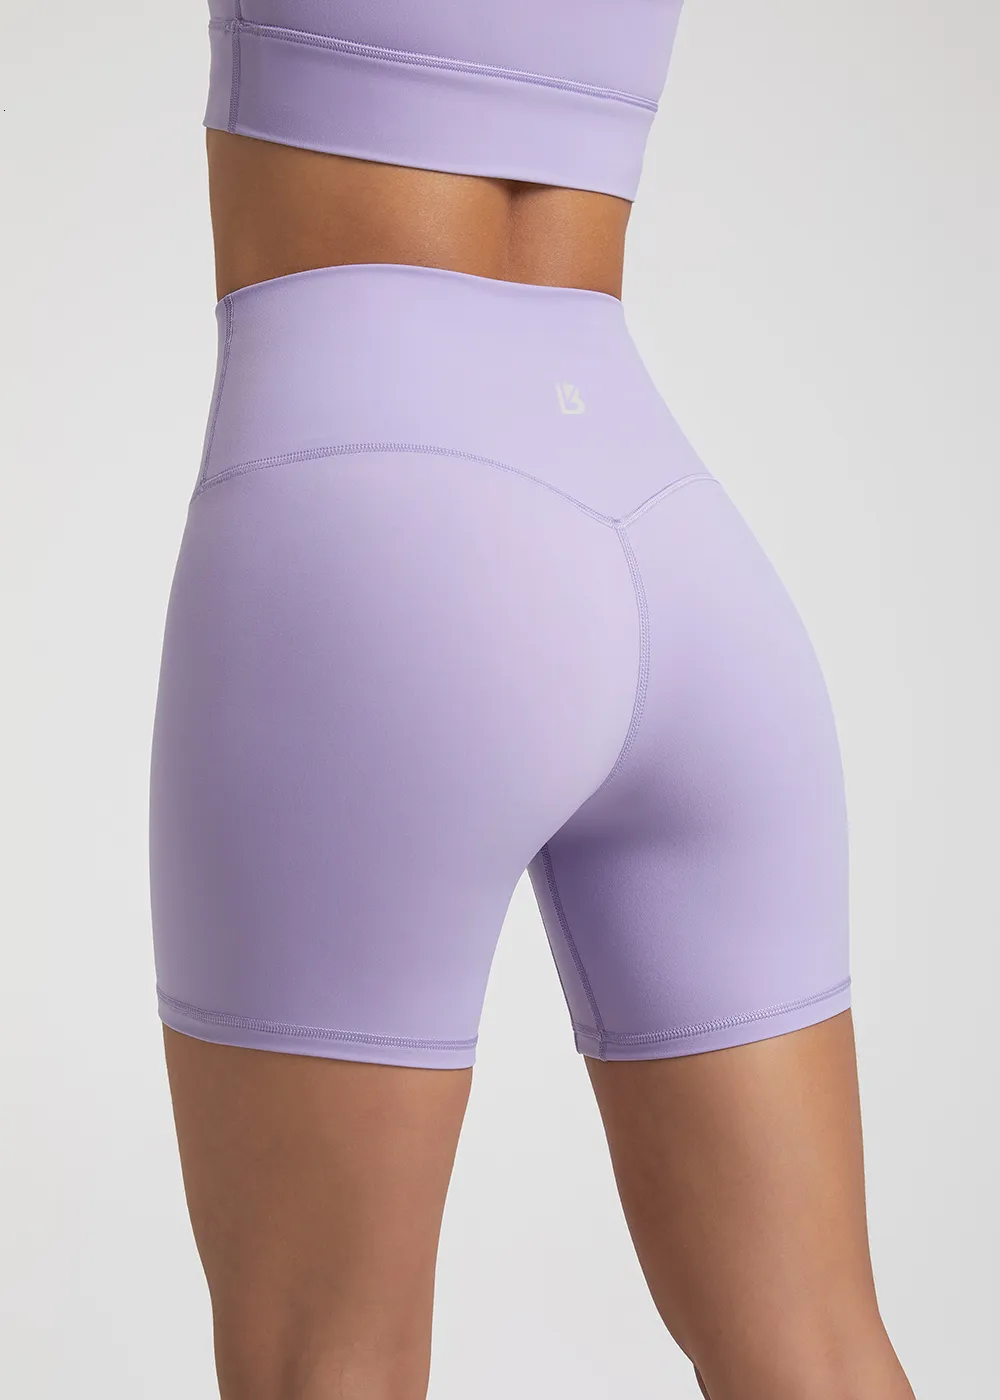 buffbunny_collection sent me some absolutely cute gym clothes! Try on haul  to come. Here's a pair of the shorts (Legacy Shorts 4”) I